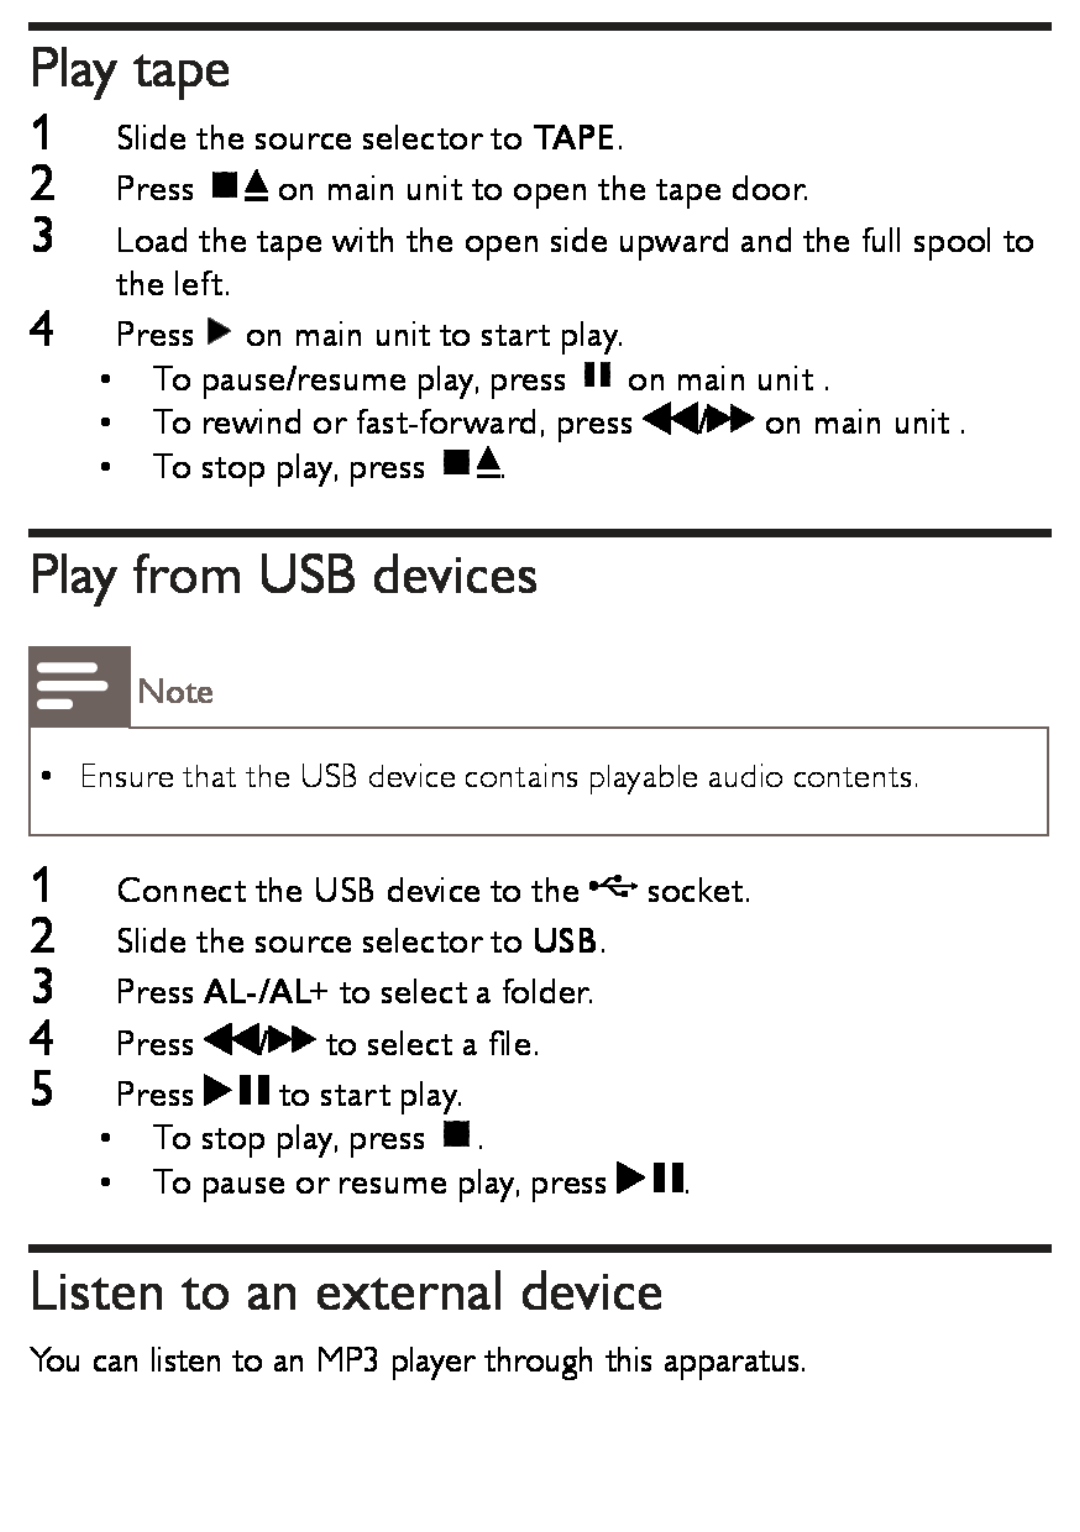 Philips AZ1852 user manual Play tape, Play from USB devices, Listen to an external device 